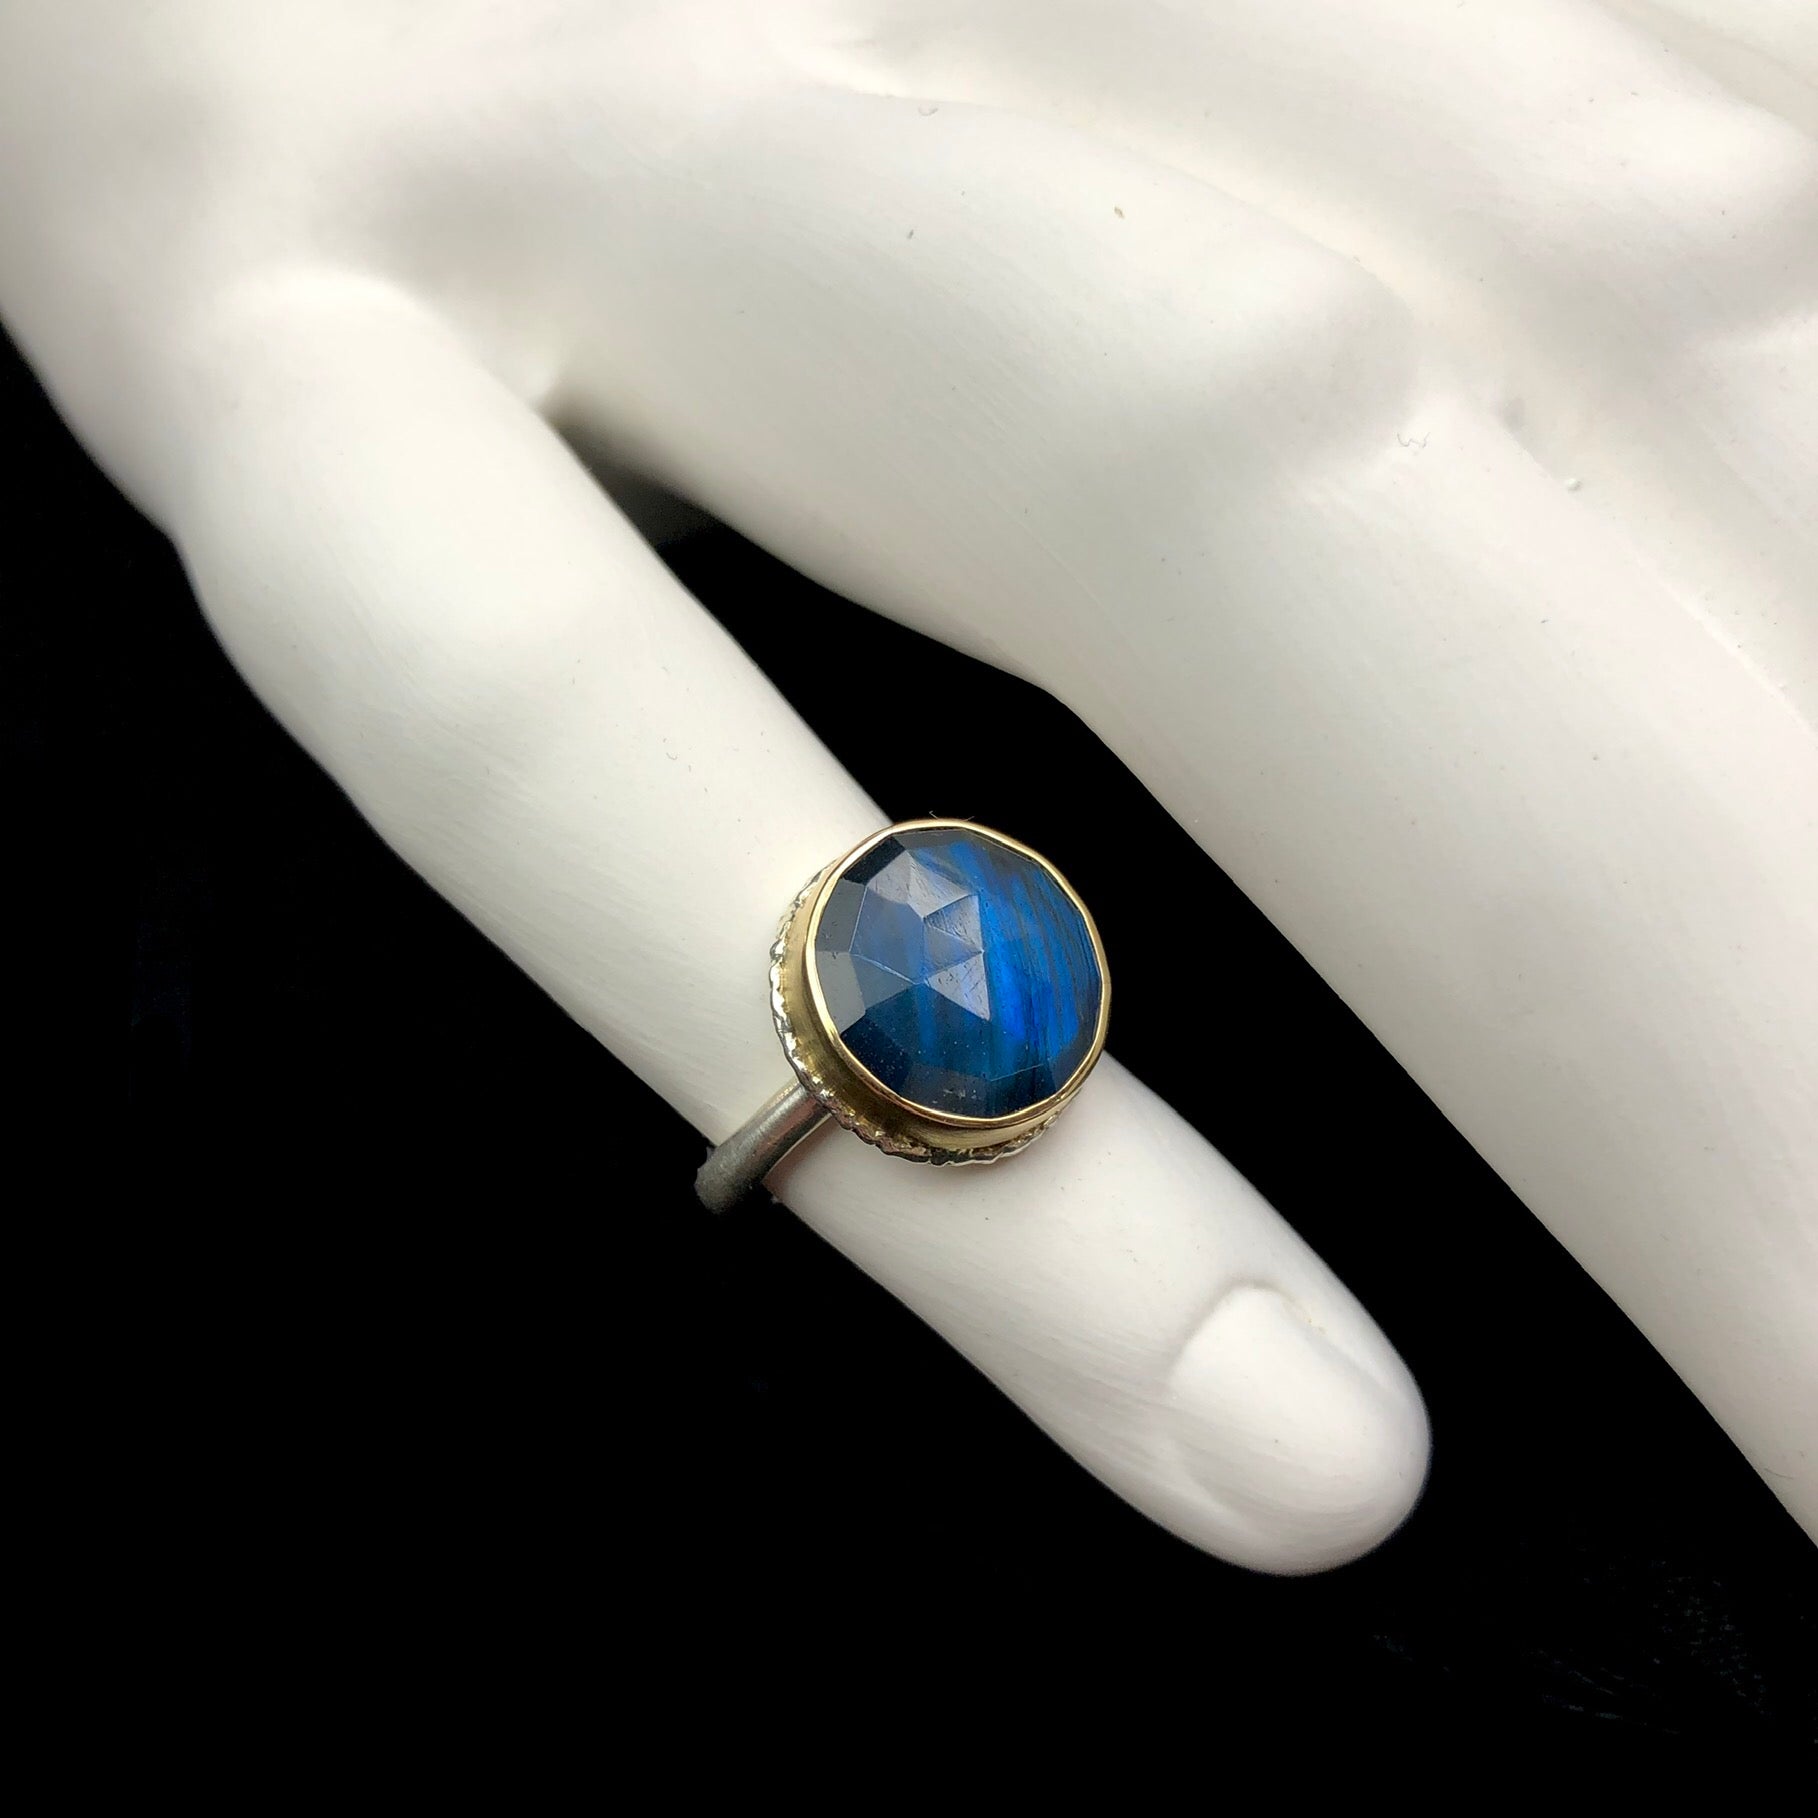 Round iridescent blue/green stone ring with gold setting shown on white ceramic finger